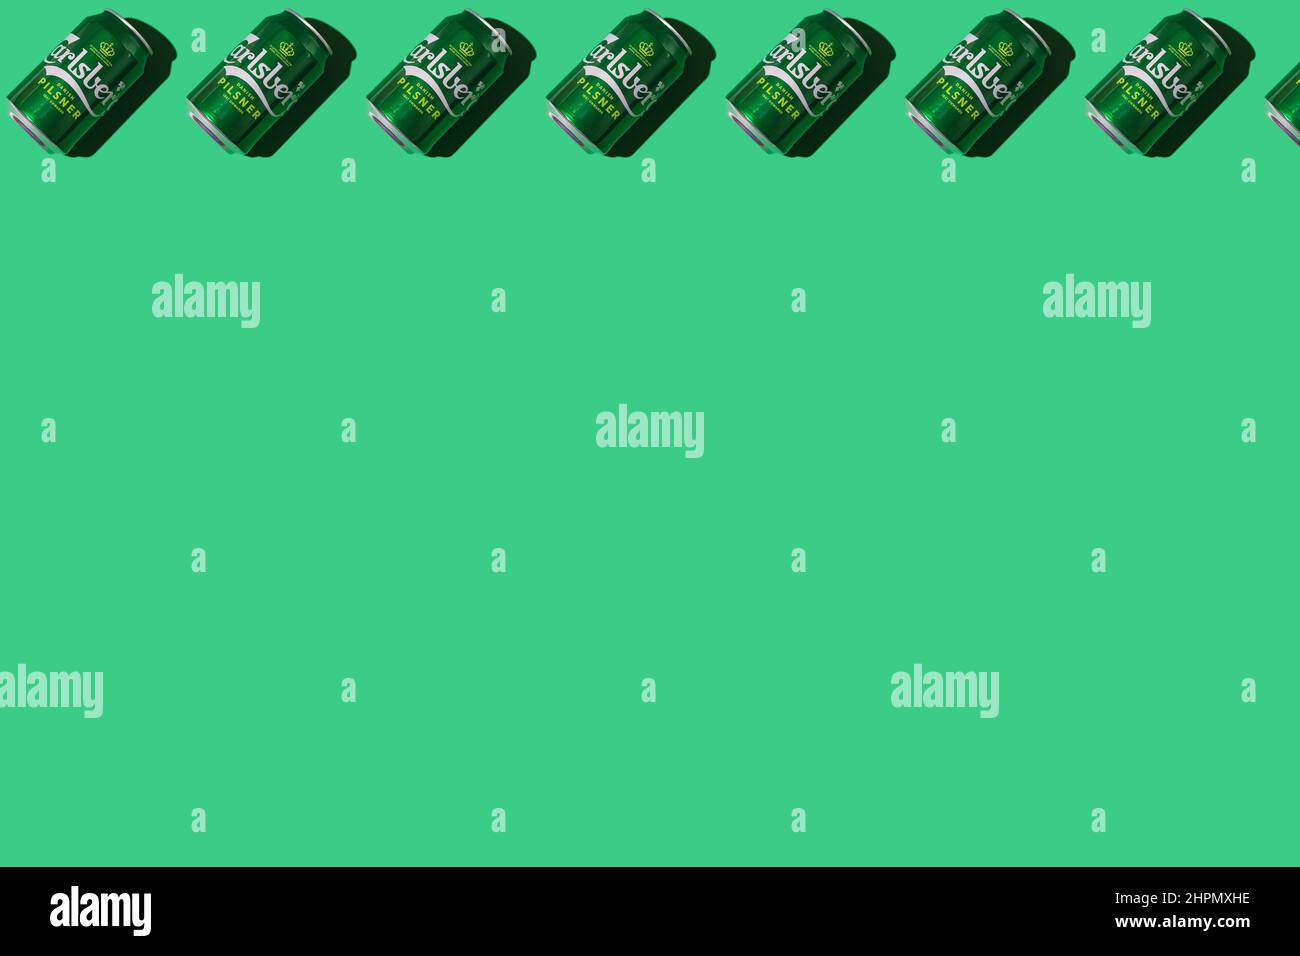 Pattern of green Heineken Dutch beer cans with hard shadow, on top, on white background. Alcohol, brewery, industry, factory and bar concept. Stock Photo